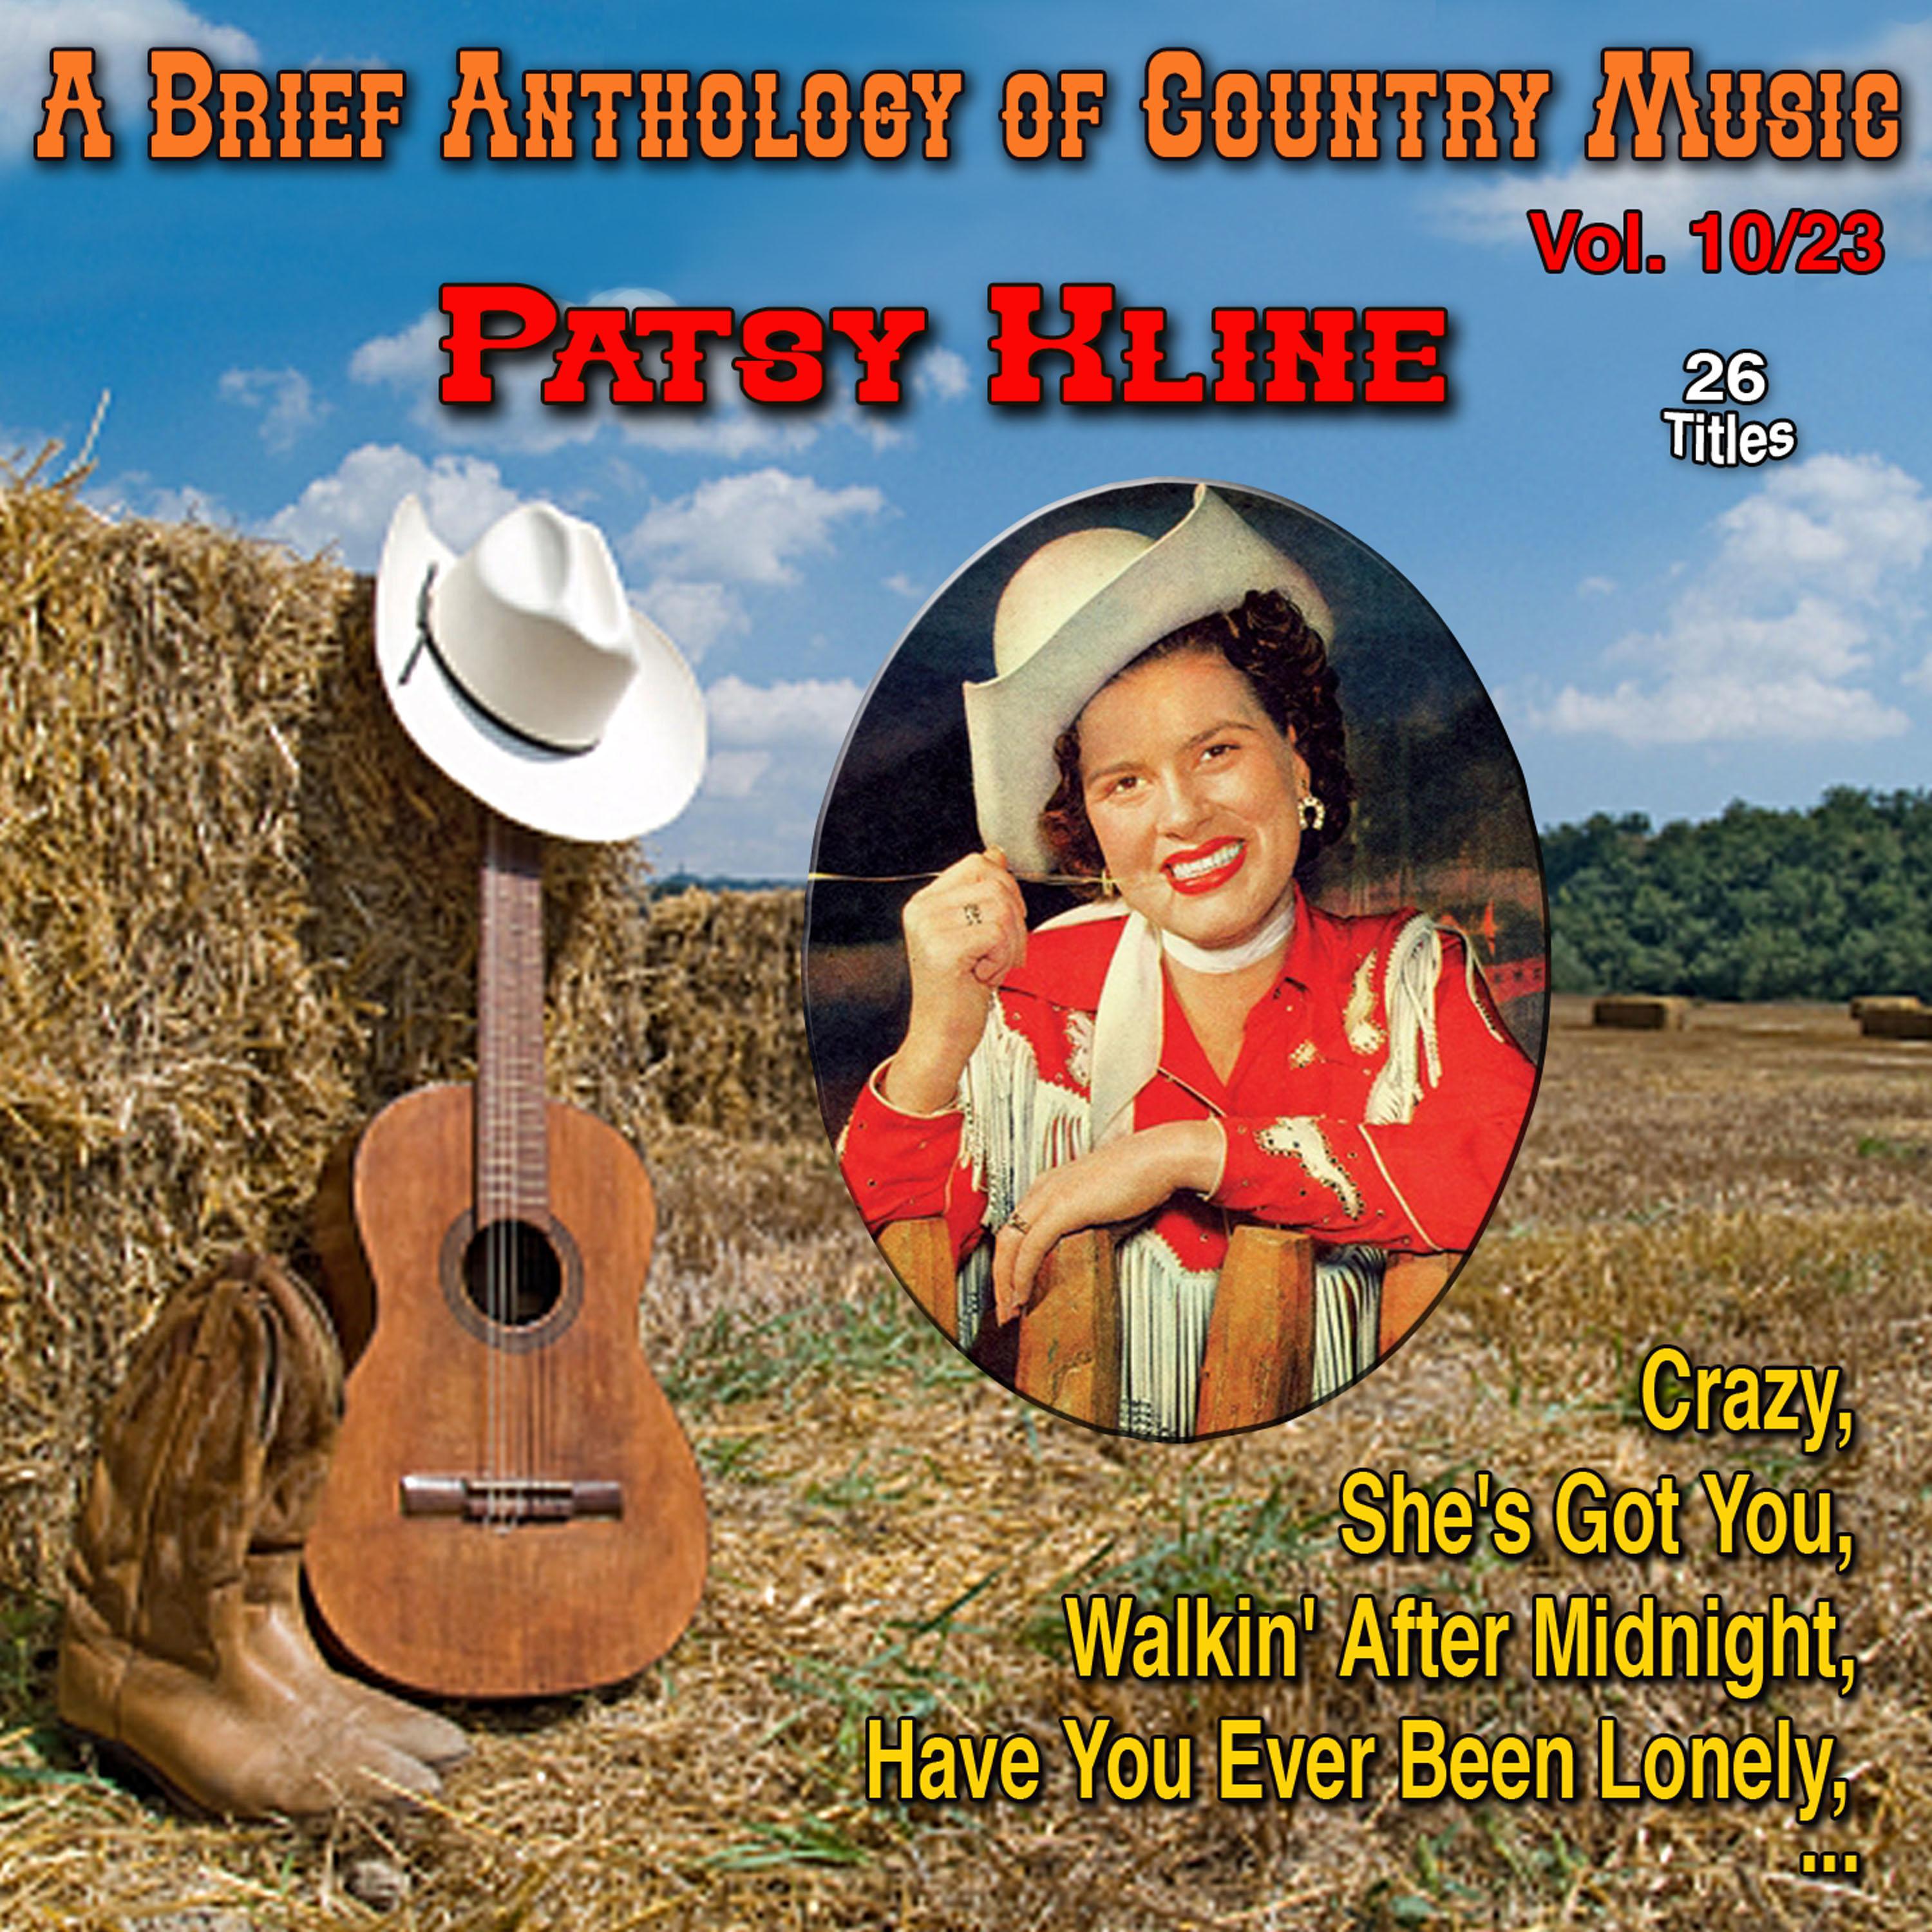 A Brief Anthology of Country Music - Vol. 10/23